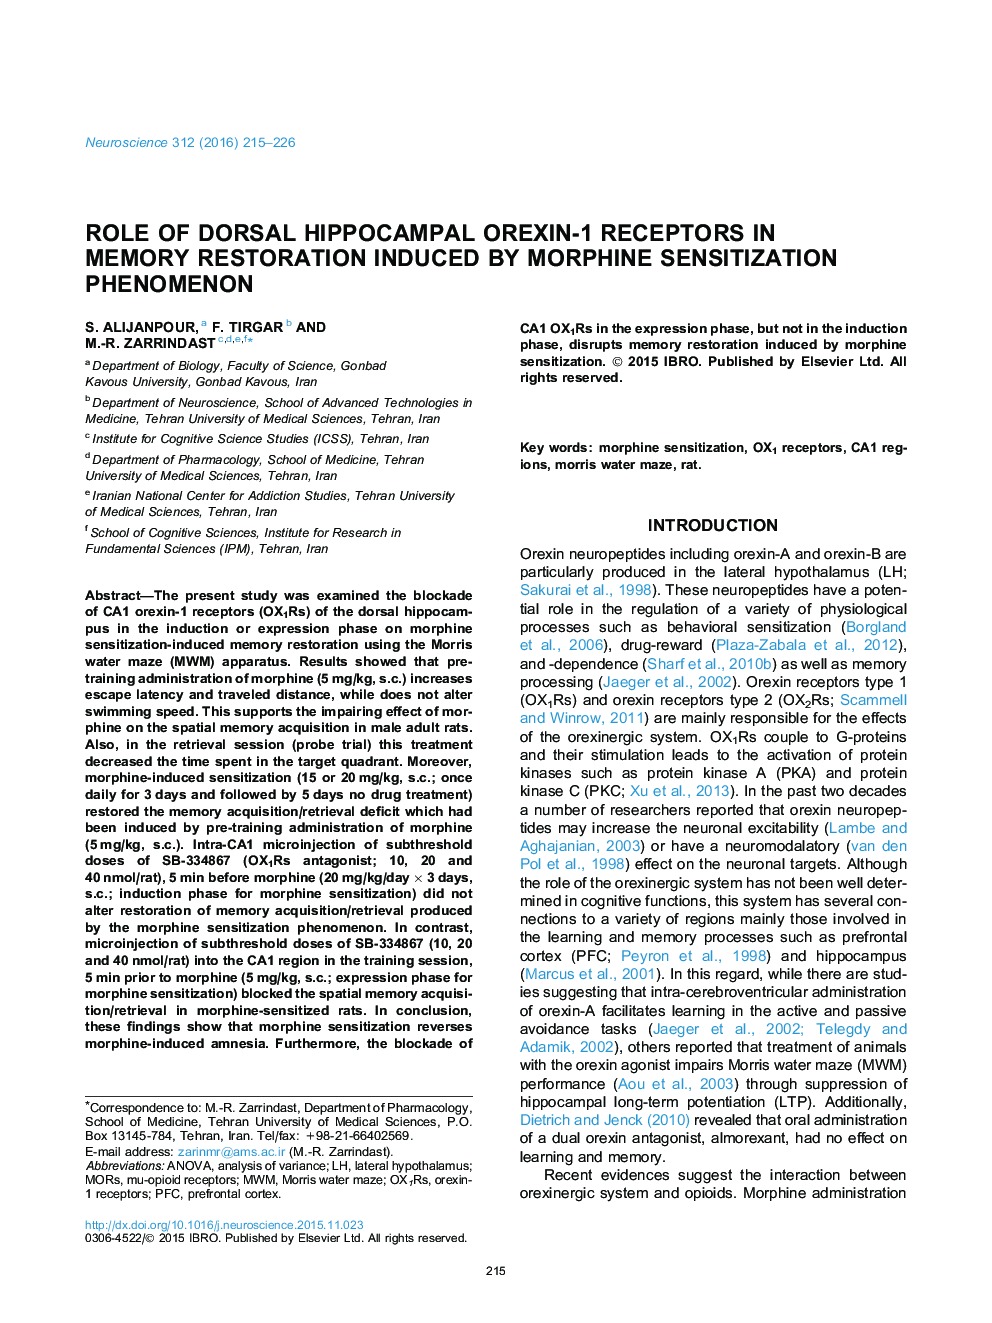 Role of dorsal hippocampal orexin-1 receptors in memory restoration induced by morphine sensitization phenomenon